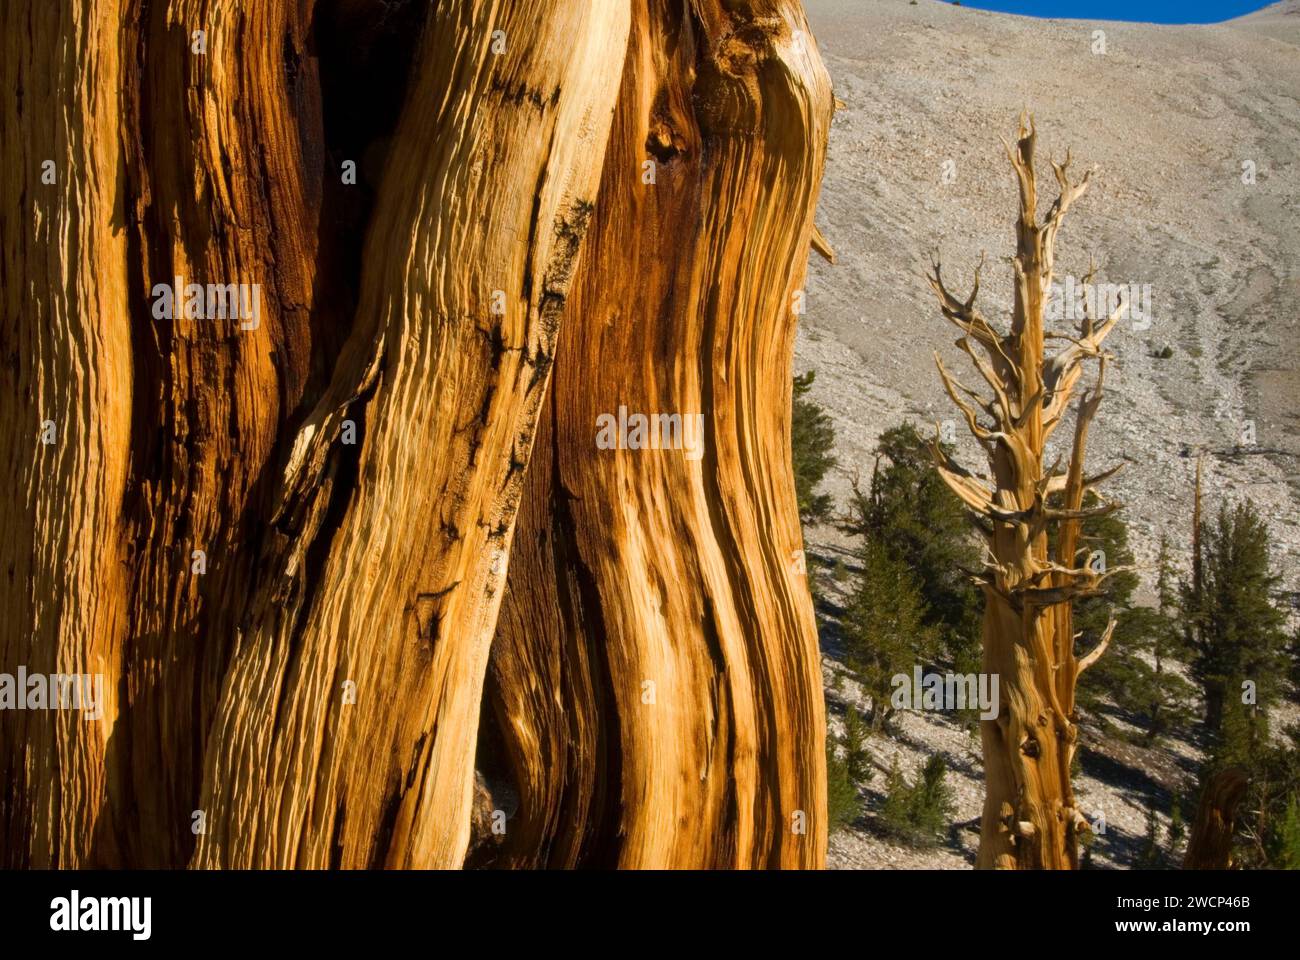 Bristlecone Pine Grove, ancien Patriarche de Bristlecone Pine Forest, ancien Bristlecone National Scenic Byway, Inyo National Forest, Californie Banque D'Images